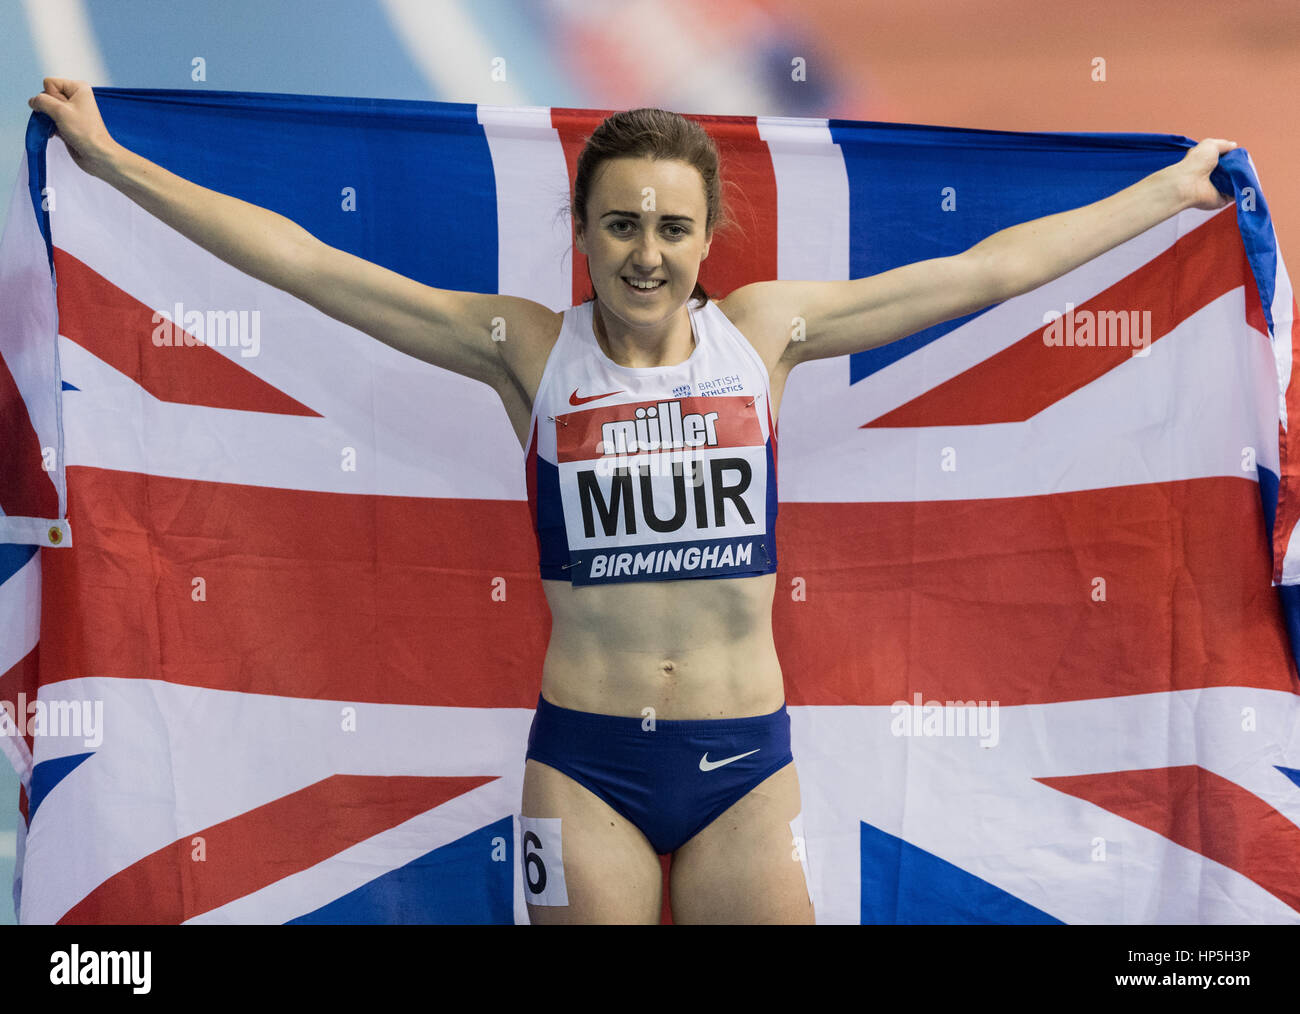 Birmingham, UK. 18th February, 2017. Laura Muir celebrates her victory at Barclaycard Arena, Birmingham, England. The Muller Indoor Grand Prix.18.02.2017 Credit: Andy Gutteridge/Alamy Live News Stock Photo